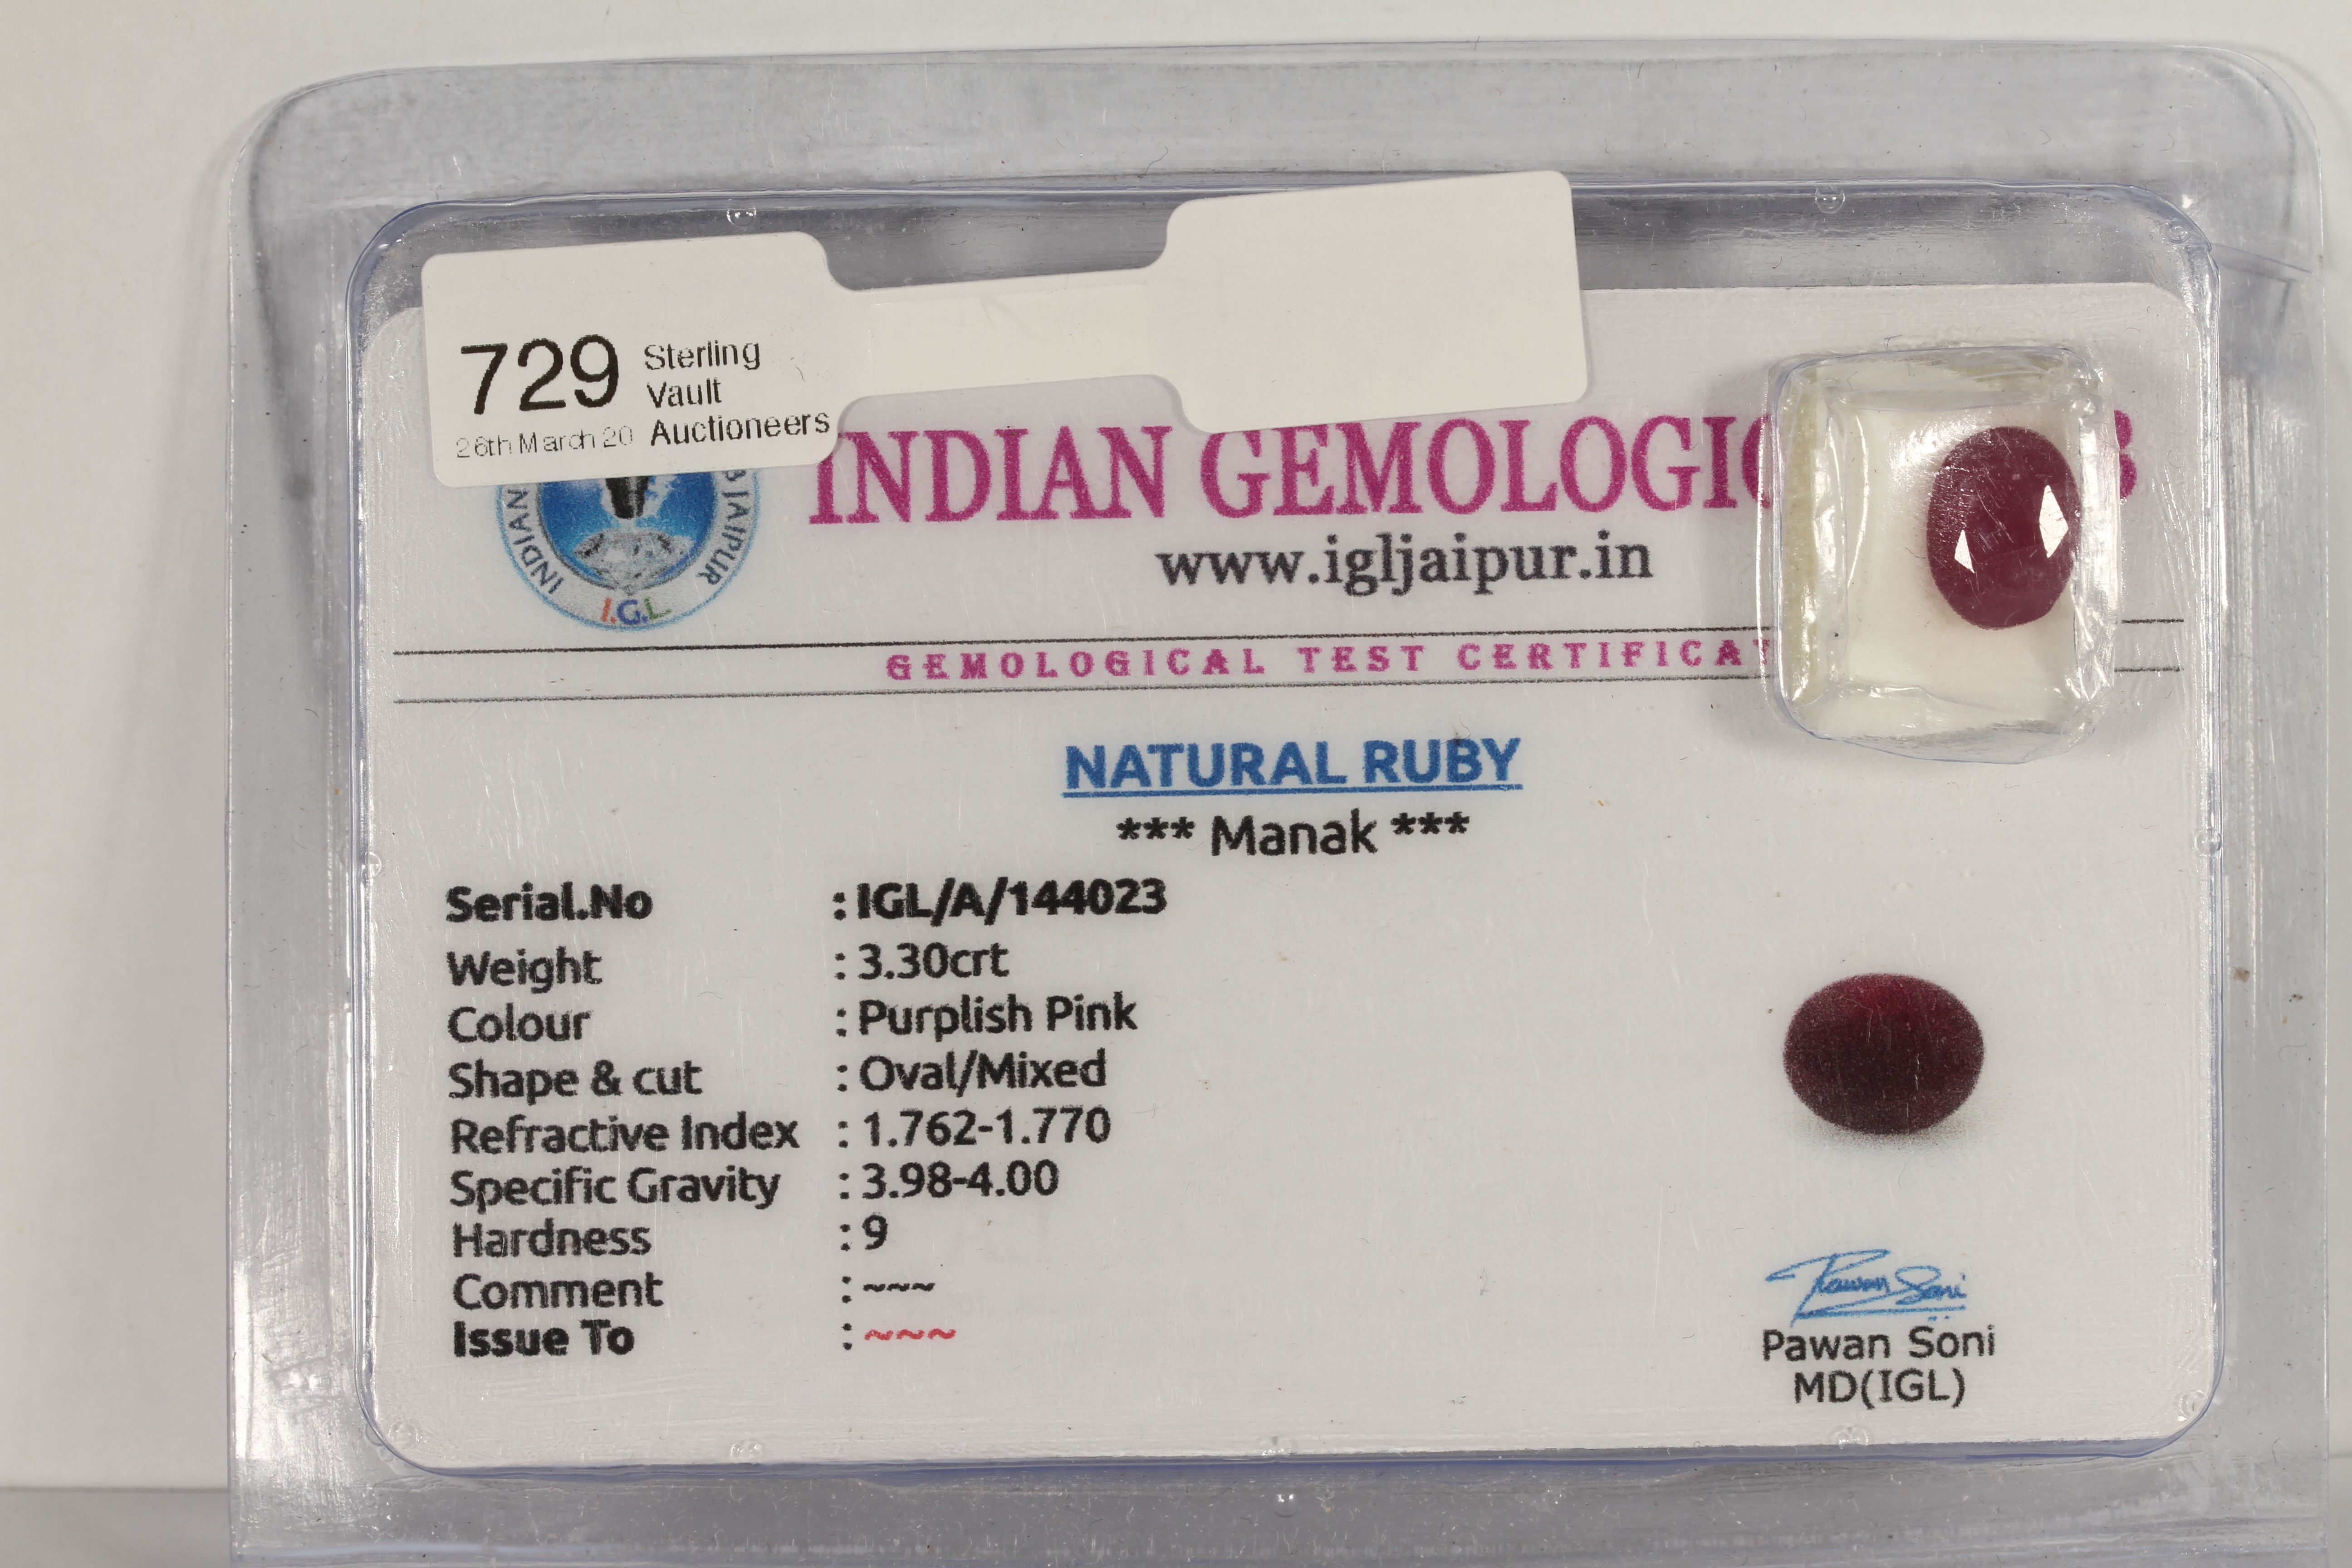 An Oval Cut Loose Natural Ruby, 3.30ct, comes with a Gemological Test Certificate.